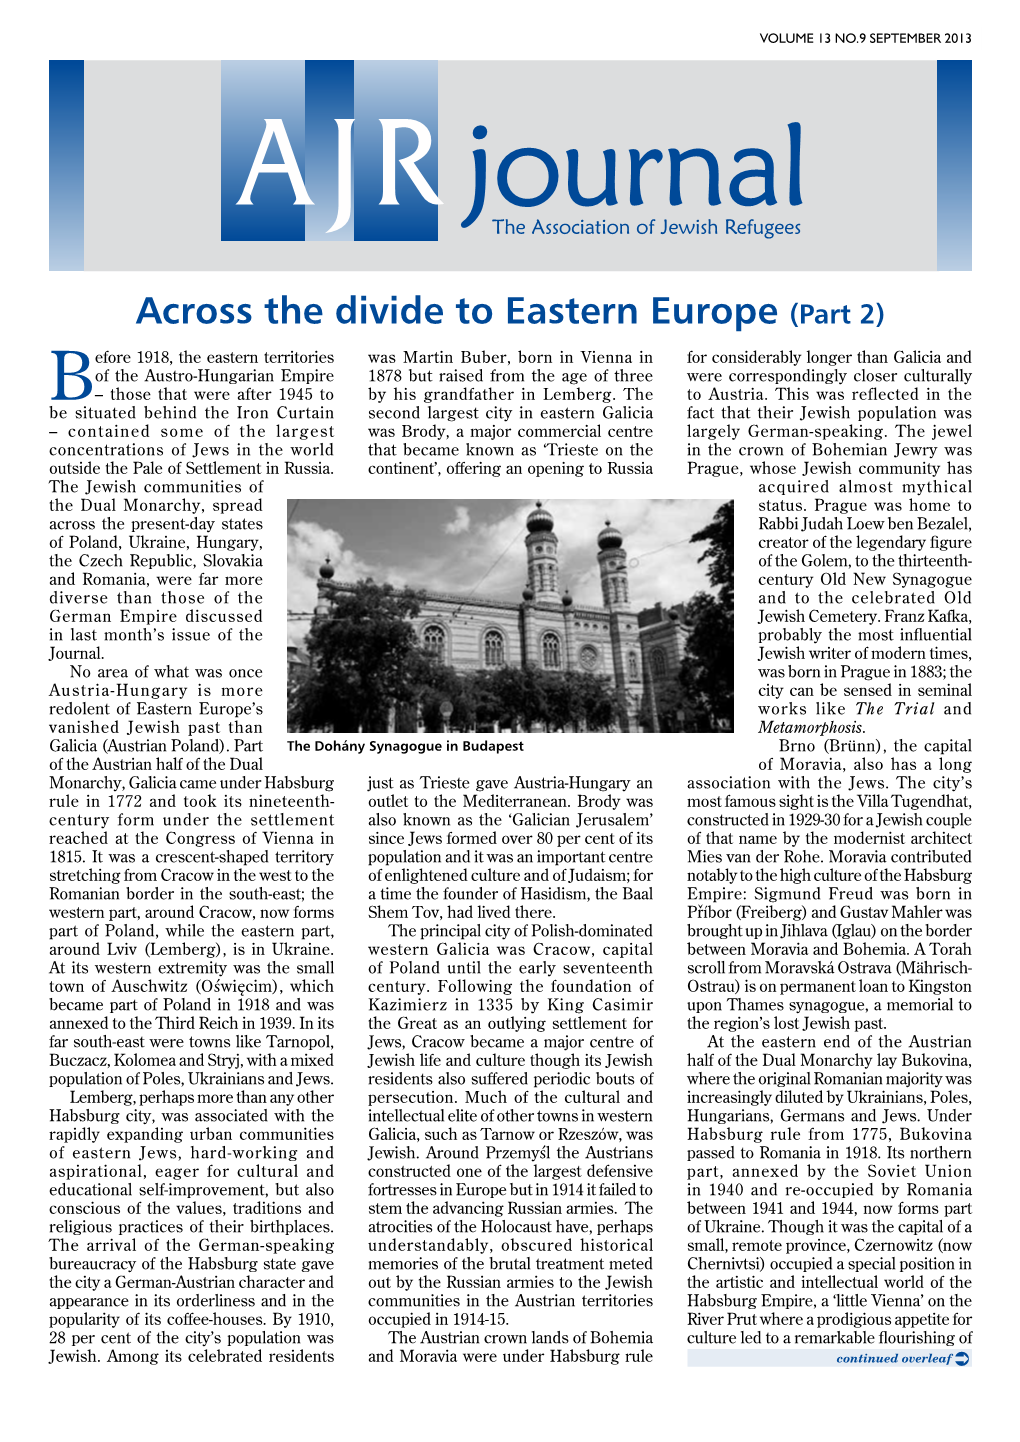 Across the Divide to Eastern Europe (Part 2)